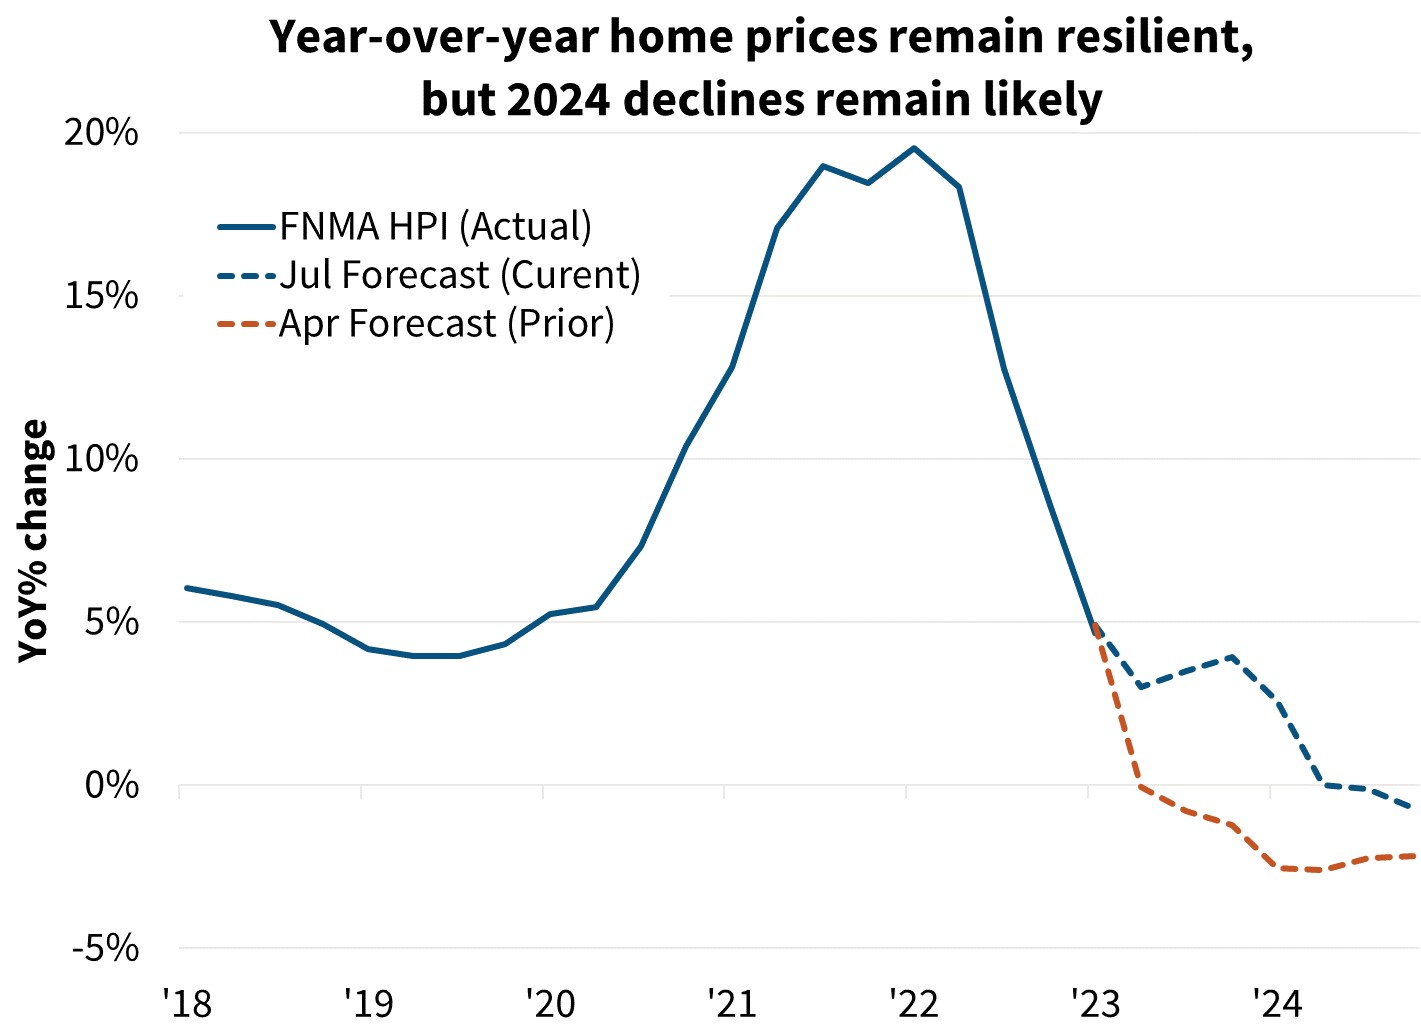 Year-over-year home prices remain resilient, but 2024 declines remain likely